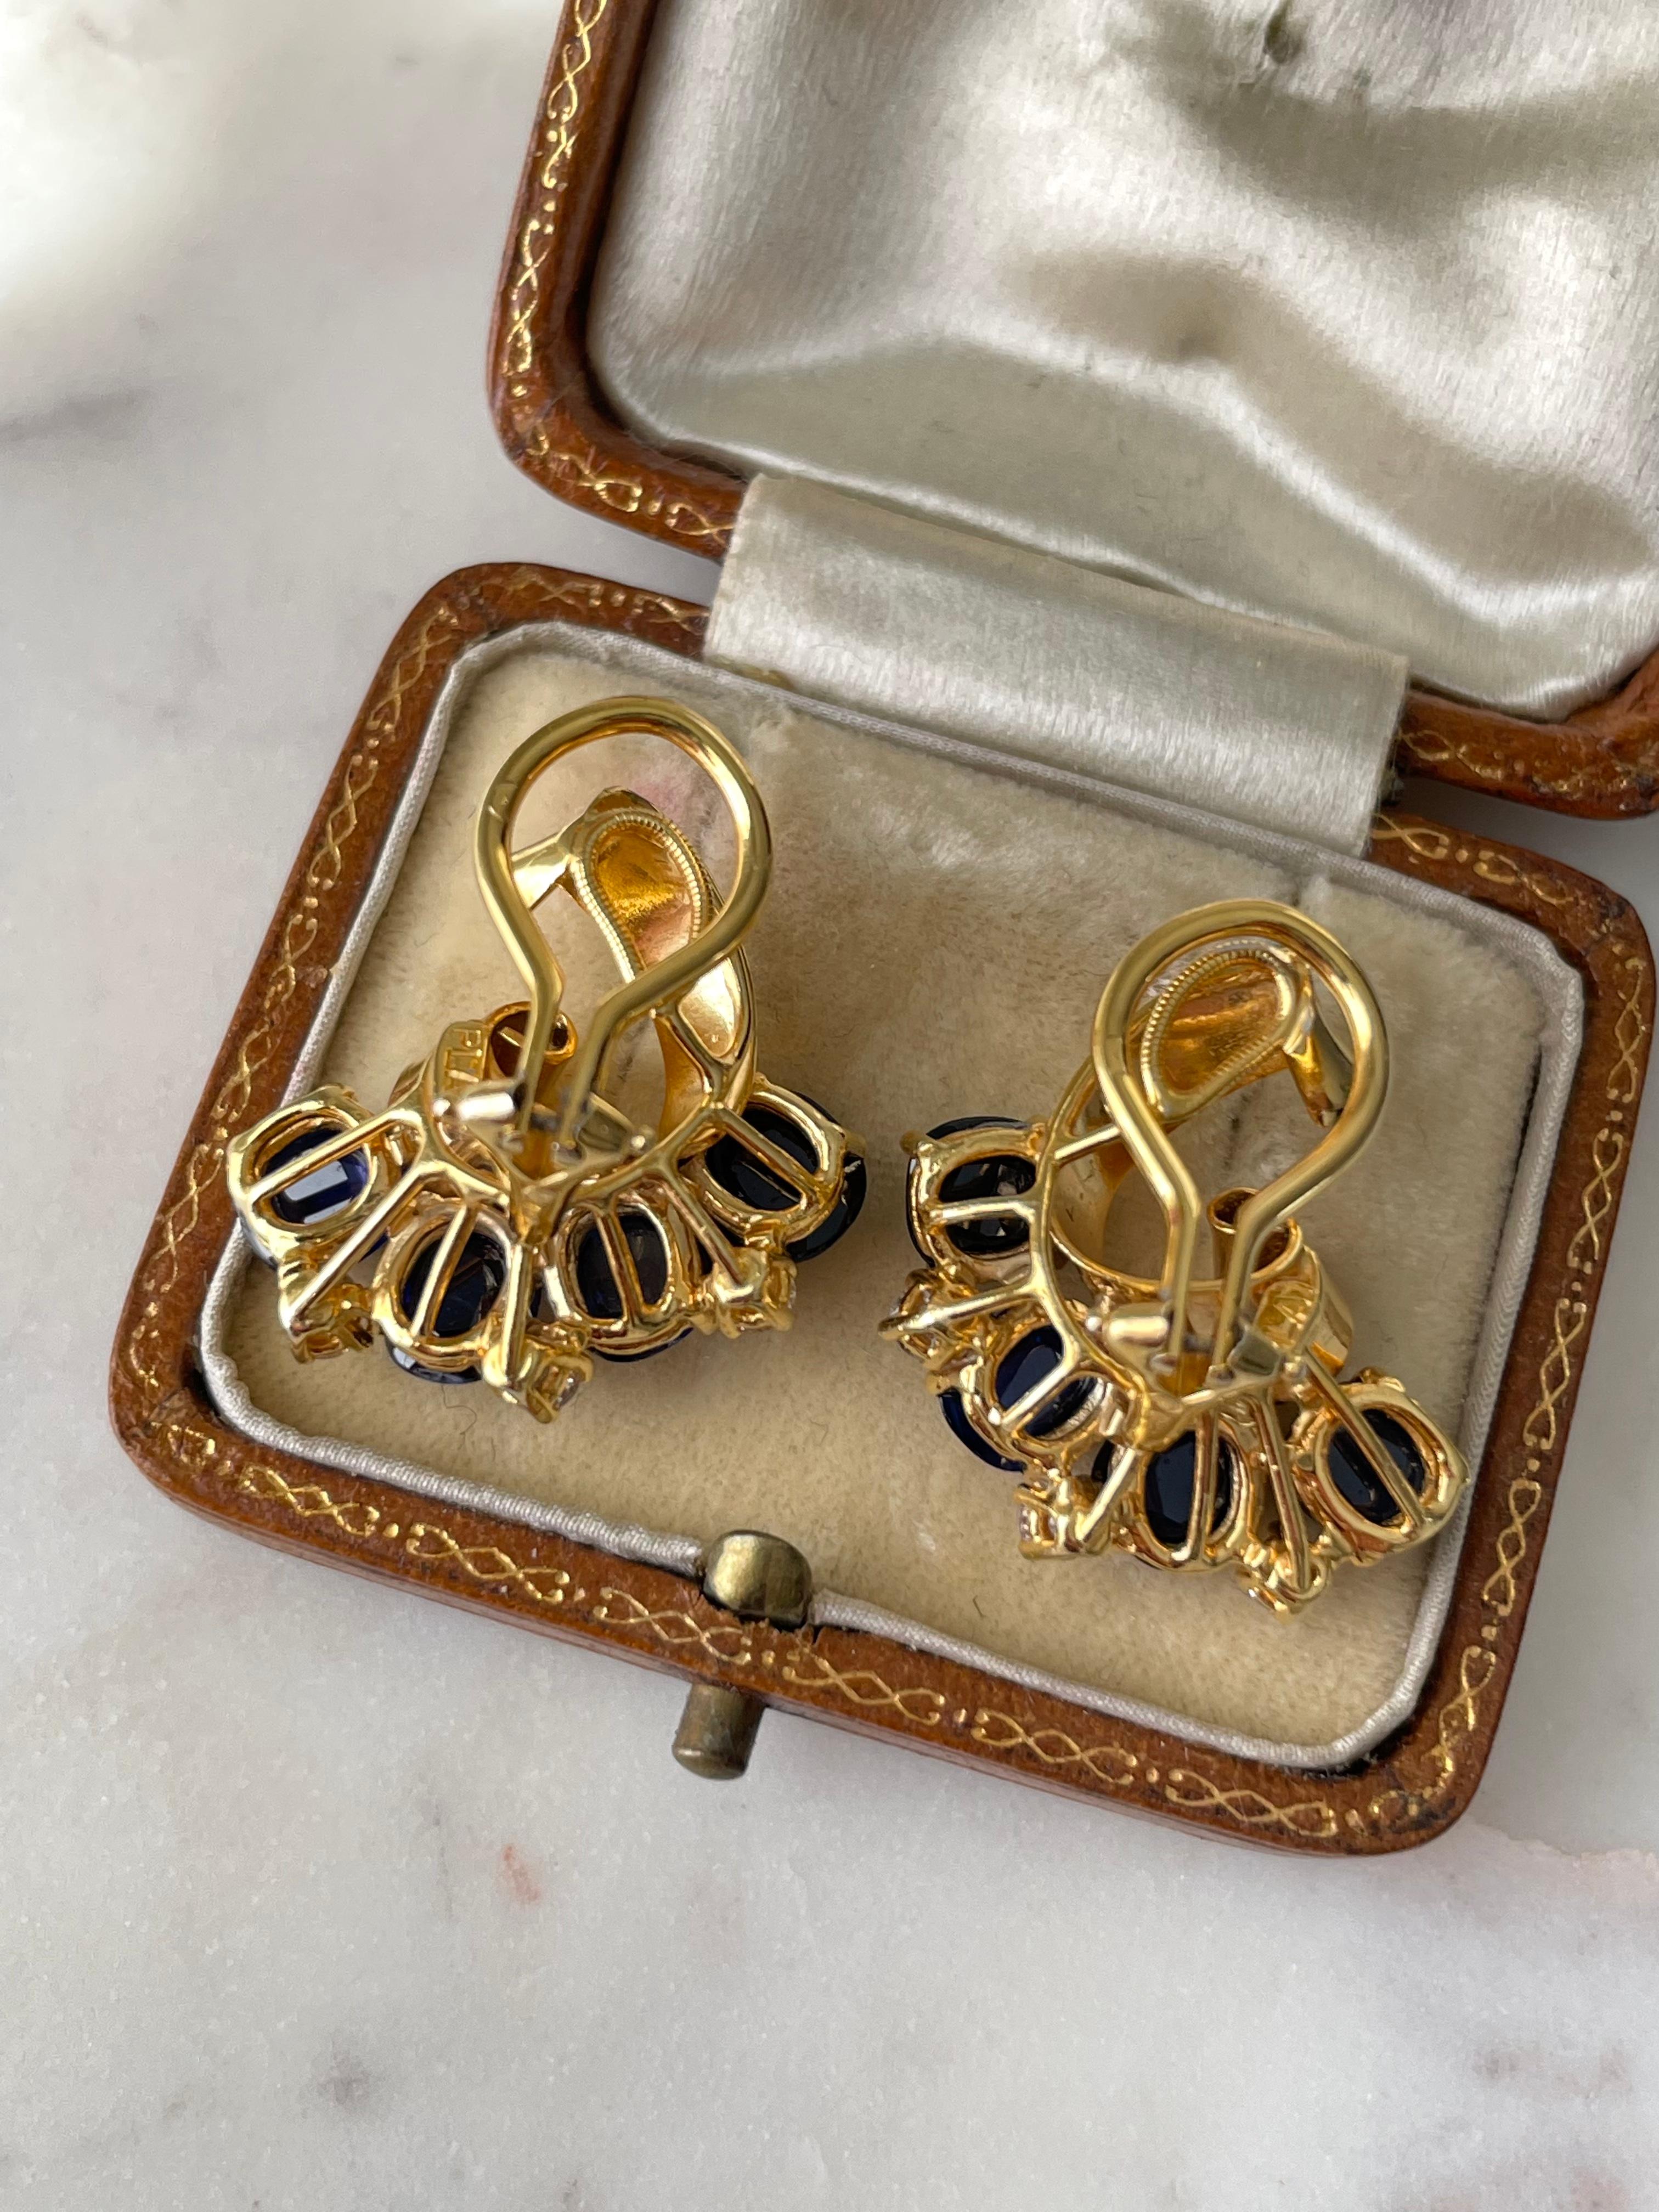 Stunning for day or night, these glamorous 1940's Raymond Yard earrings radiate with 8.8 carats of vivid blue cabochon sapphires and .60 total carats of sparkling brilliant-cut diamonds. Expertly fabricated in platinum, these earrings were plated in